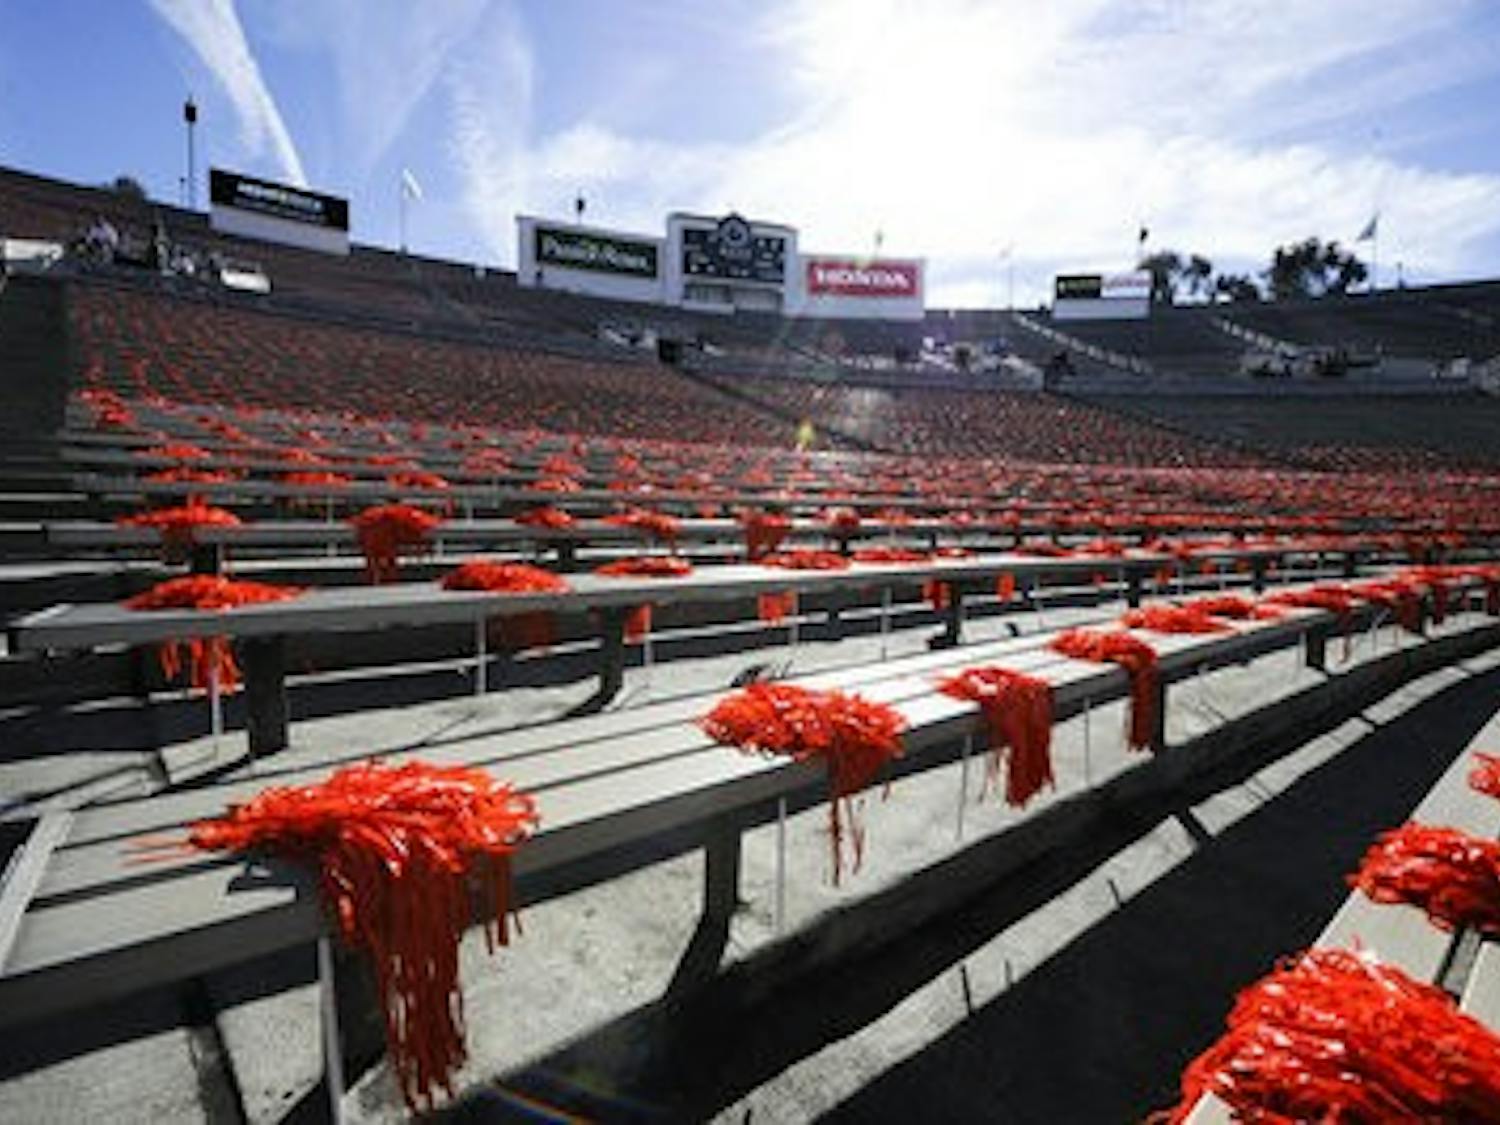 Shakers line the stands of the Auburn student section of the Rose Bowl before the game.
Zach Bland / Photographer